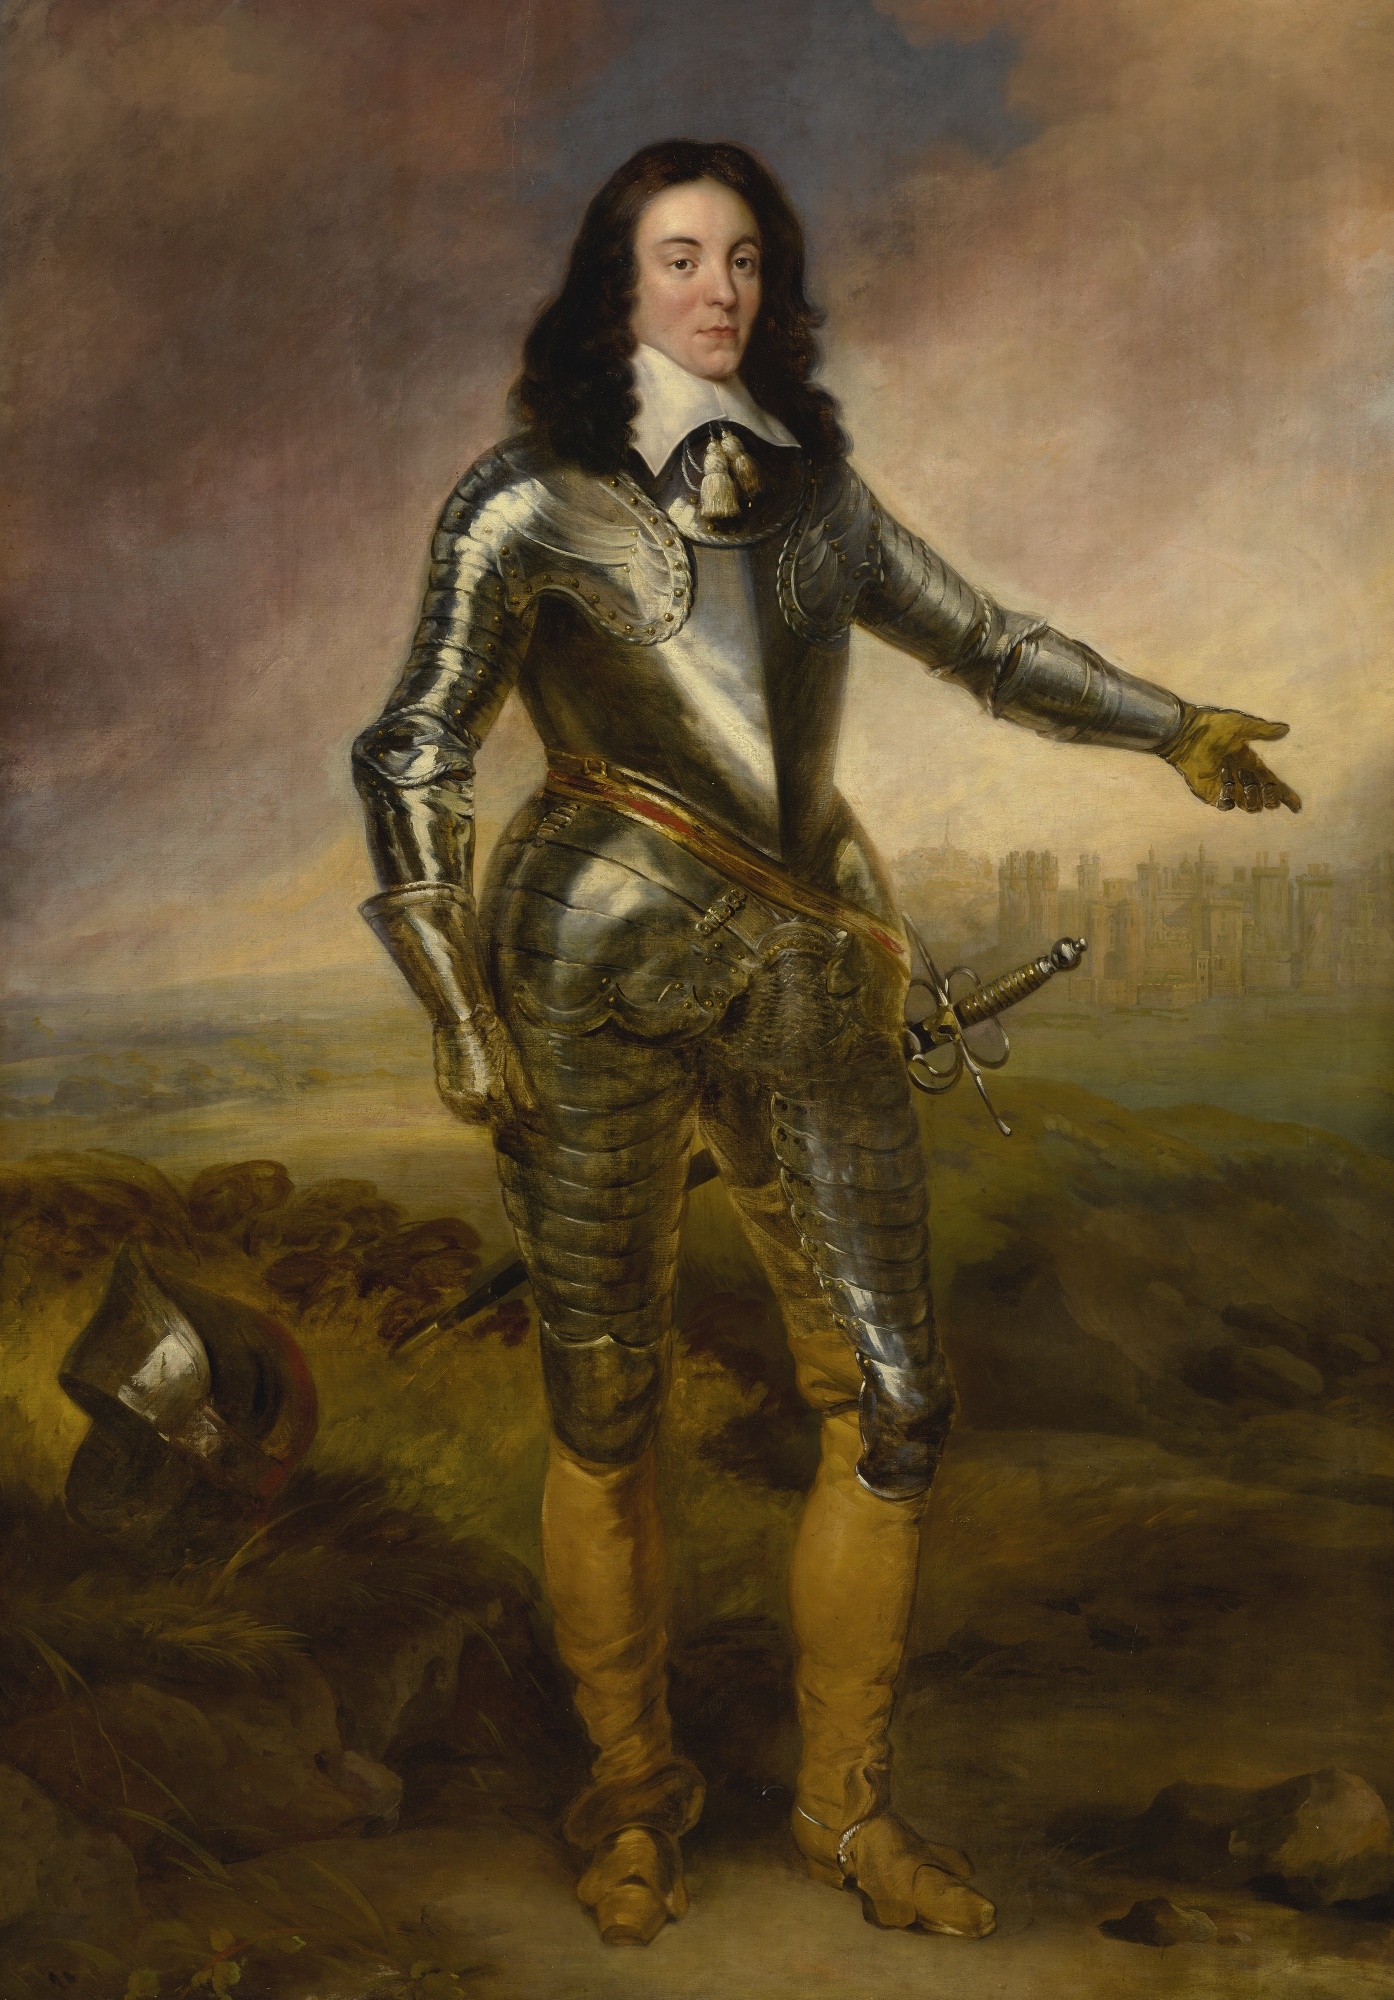 Artwork by British School, 18th Century, PORTRAIT OF A GENTLEMAN, PROBABLY CAPTAIN JOSEPH POOLE OF SYKEHOUSE, WEARING ARMOR AND STANDING IN A LANDSCAPE, Made of oil on canvas